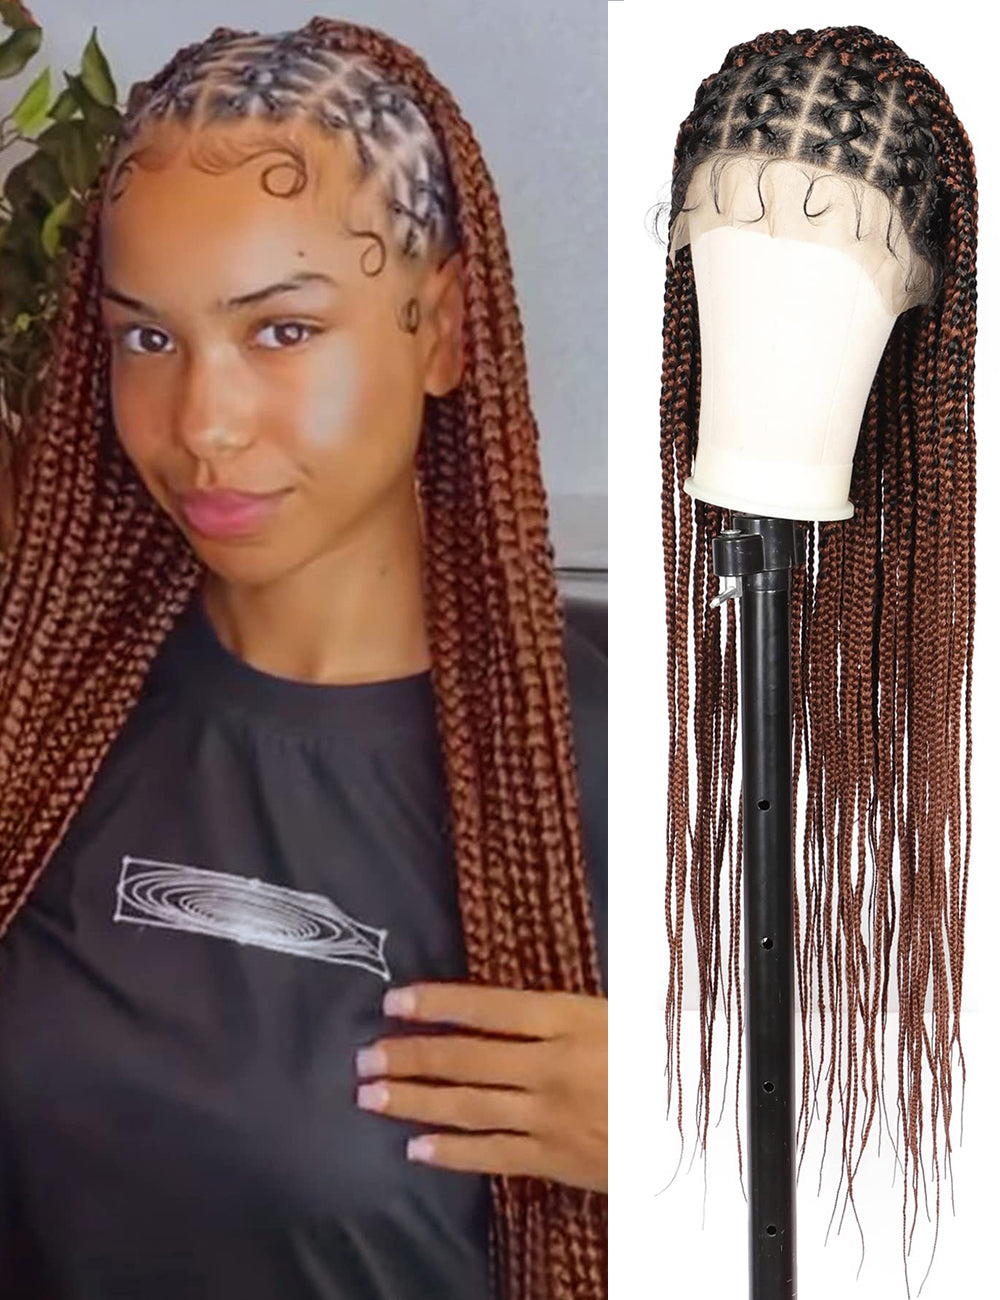 36 Inch Knotless Full Double Lace Box Braided Wigs